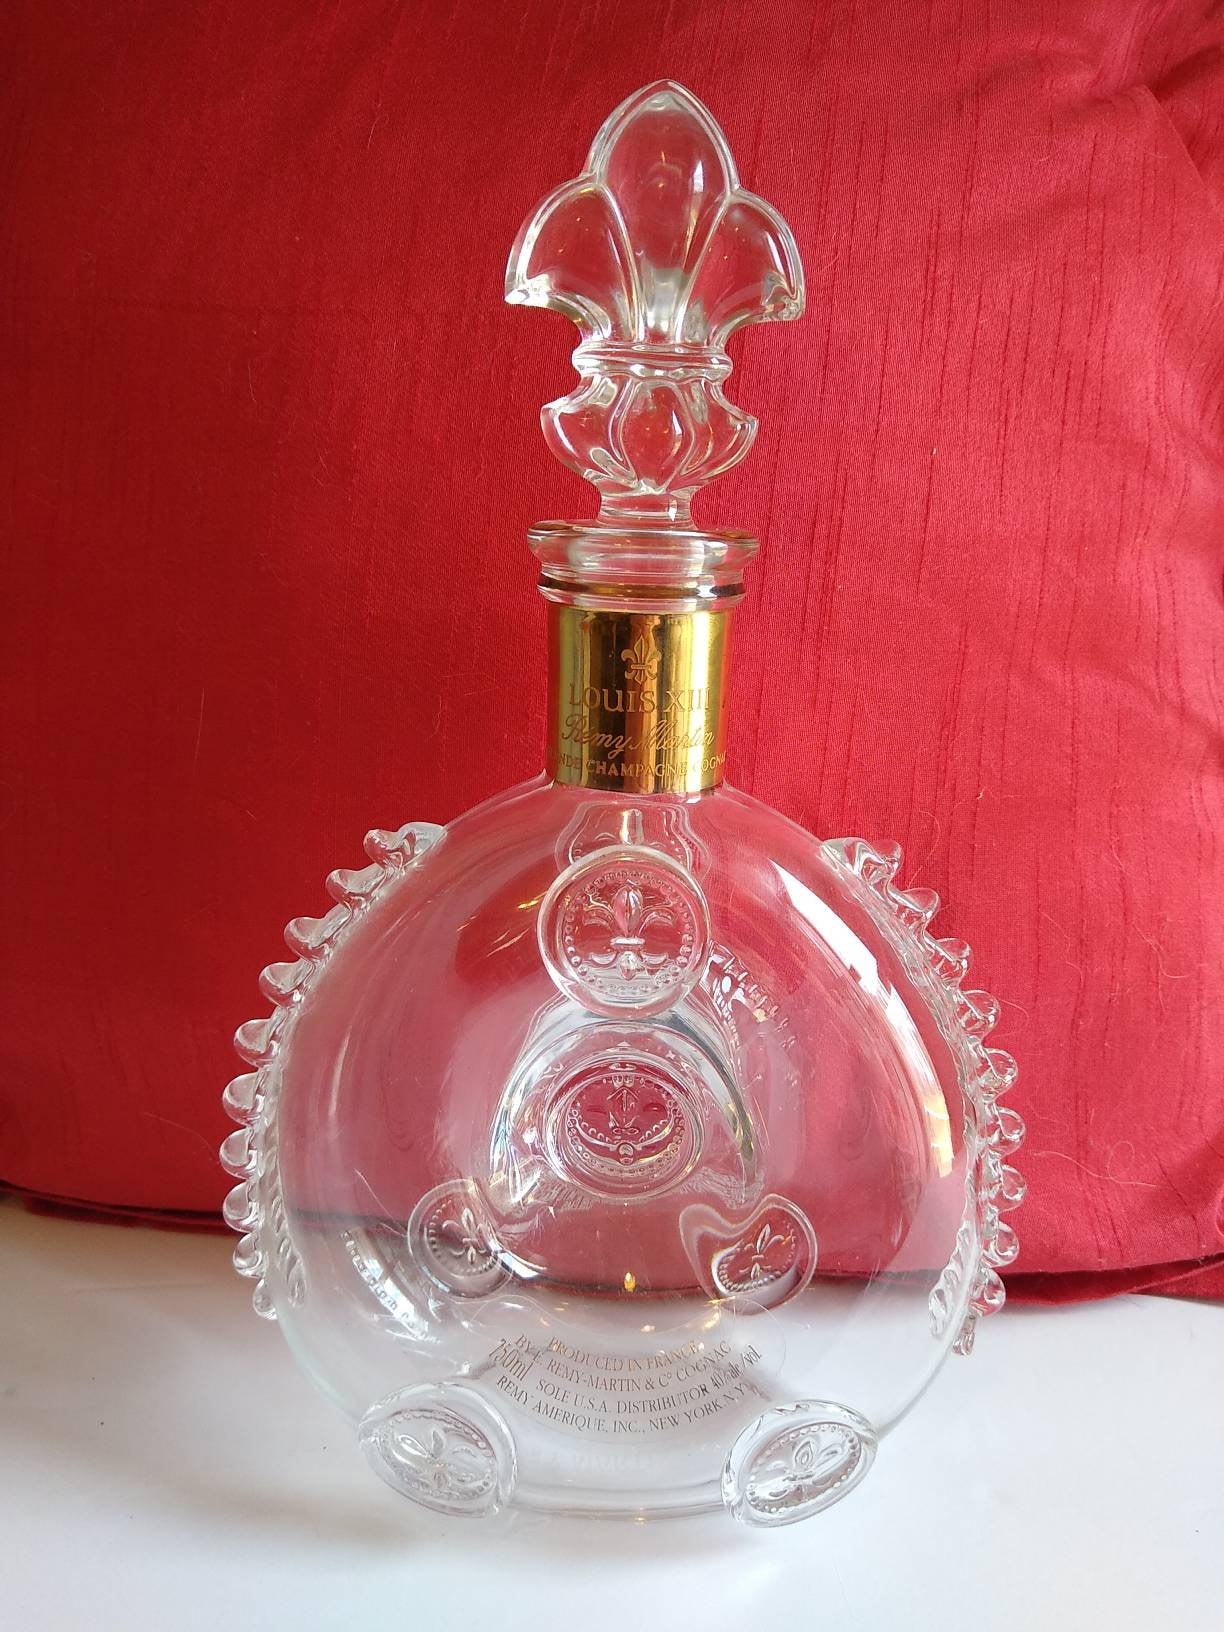 REMY MARTIN Louis XIII Cognac BACCARAT Crystal Decanter Empty Bottle 750 ML